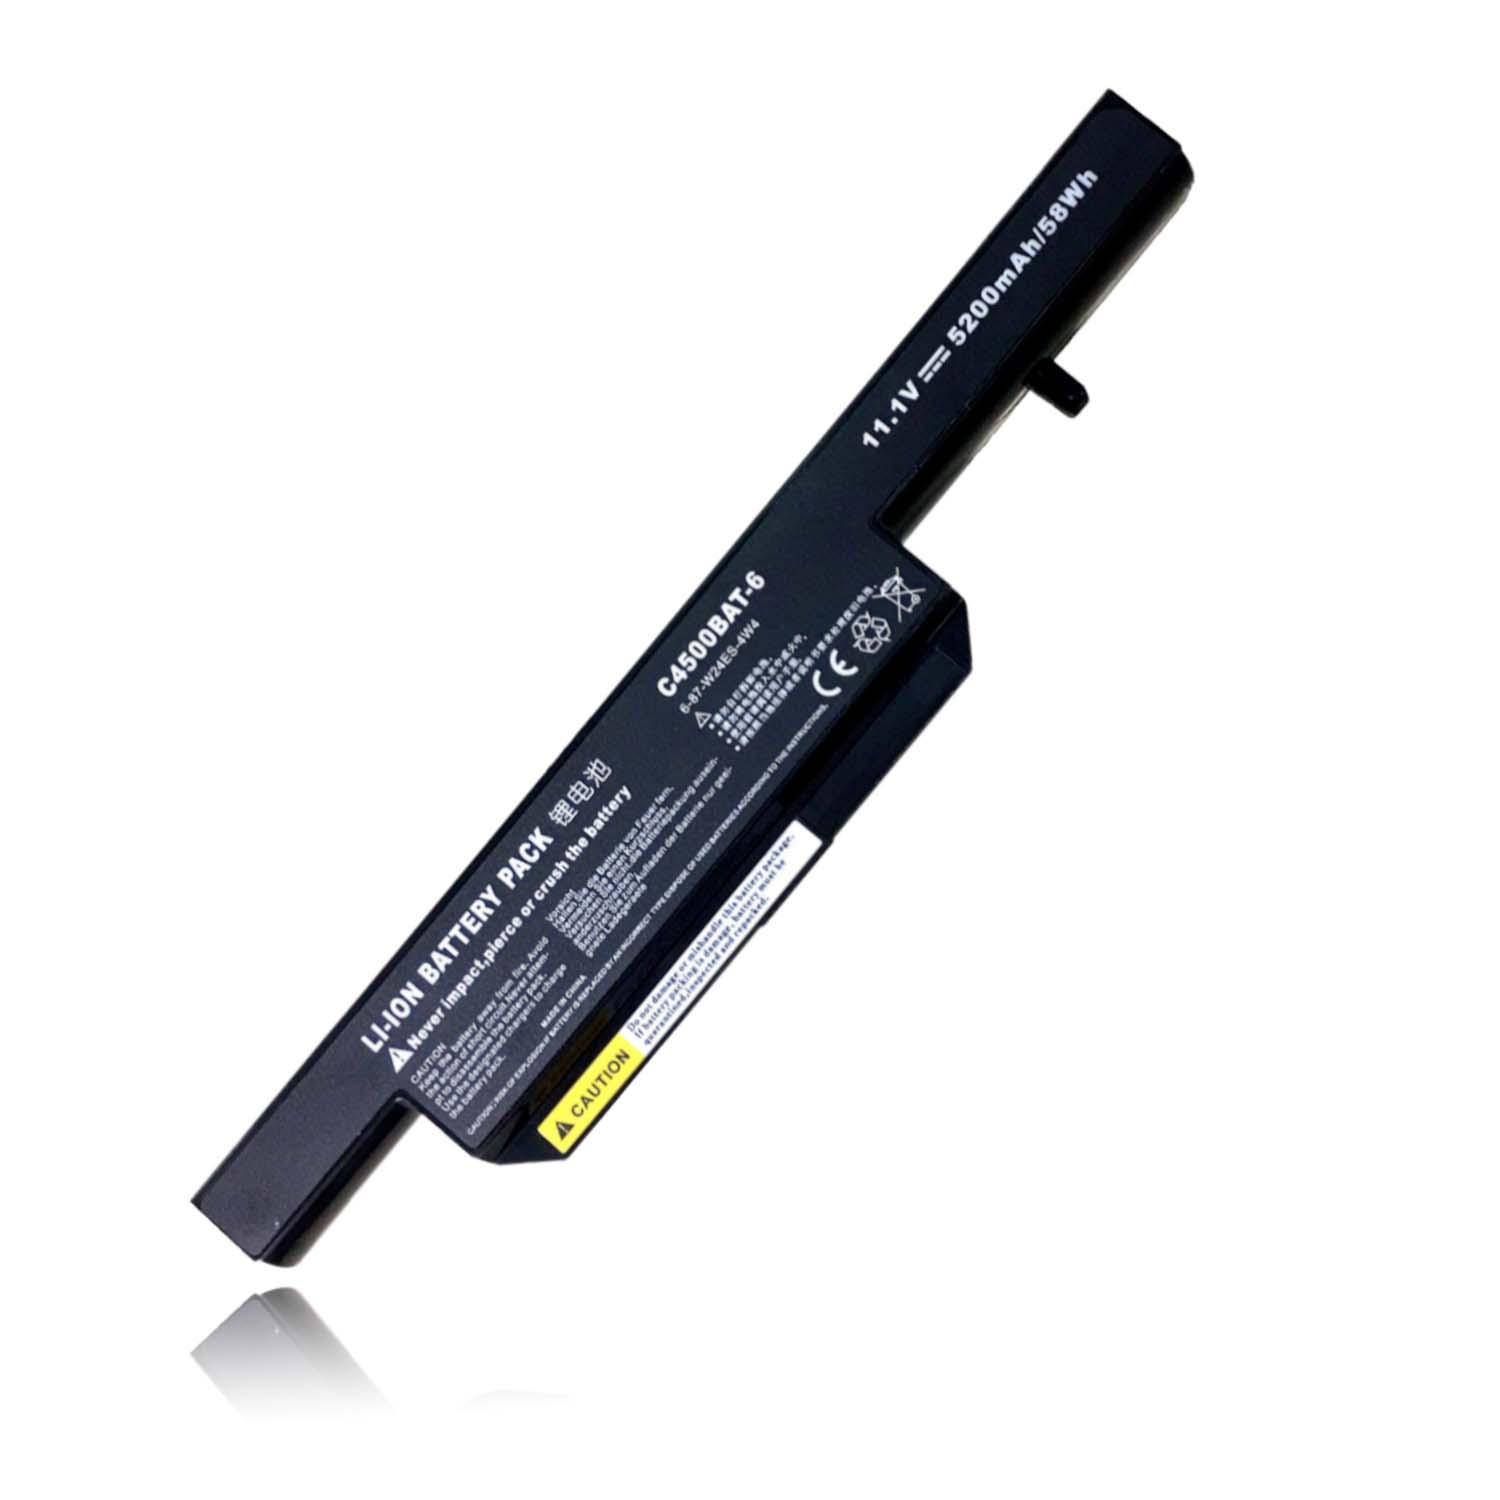 Acer Battery for Clevo C4500